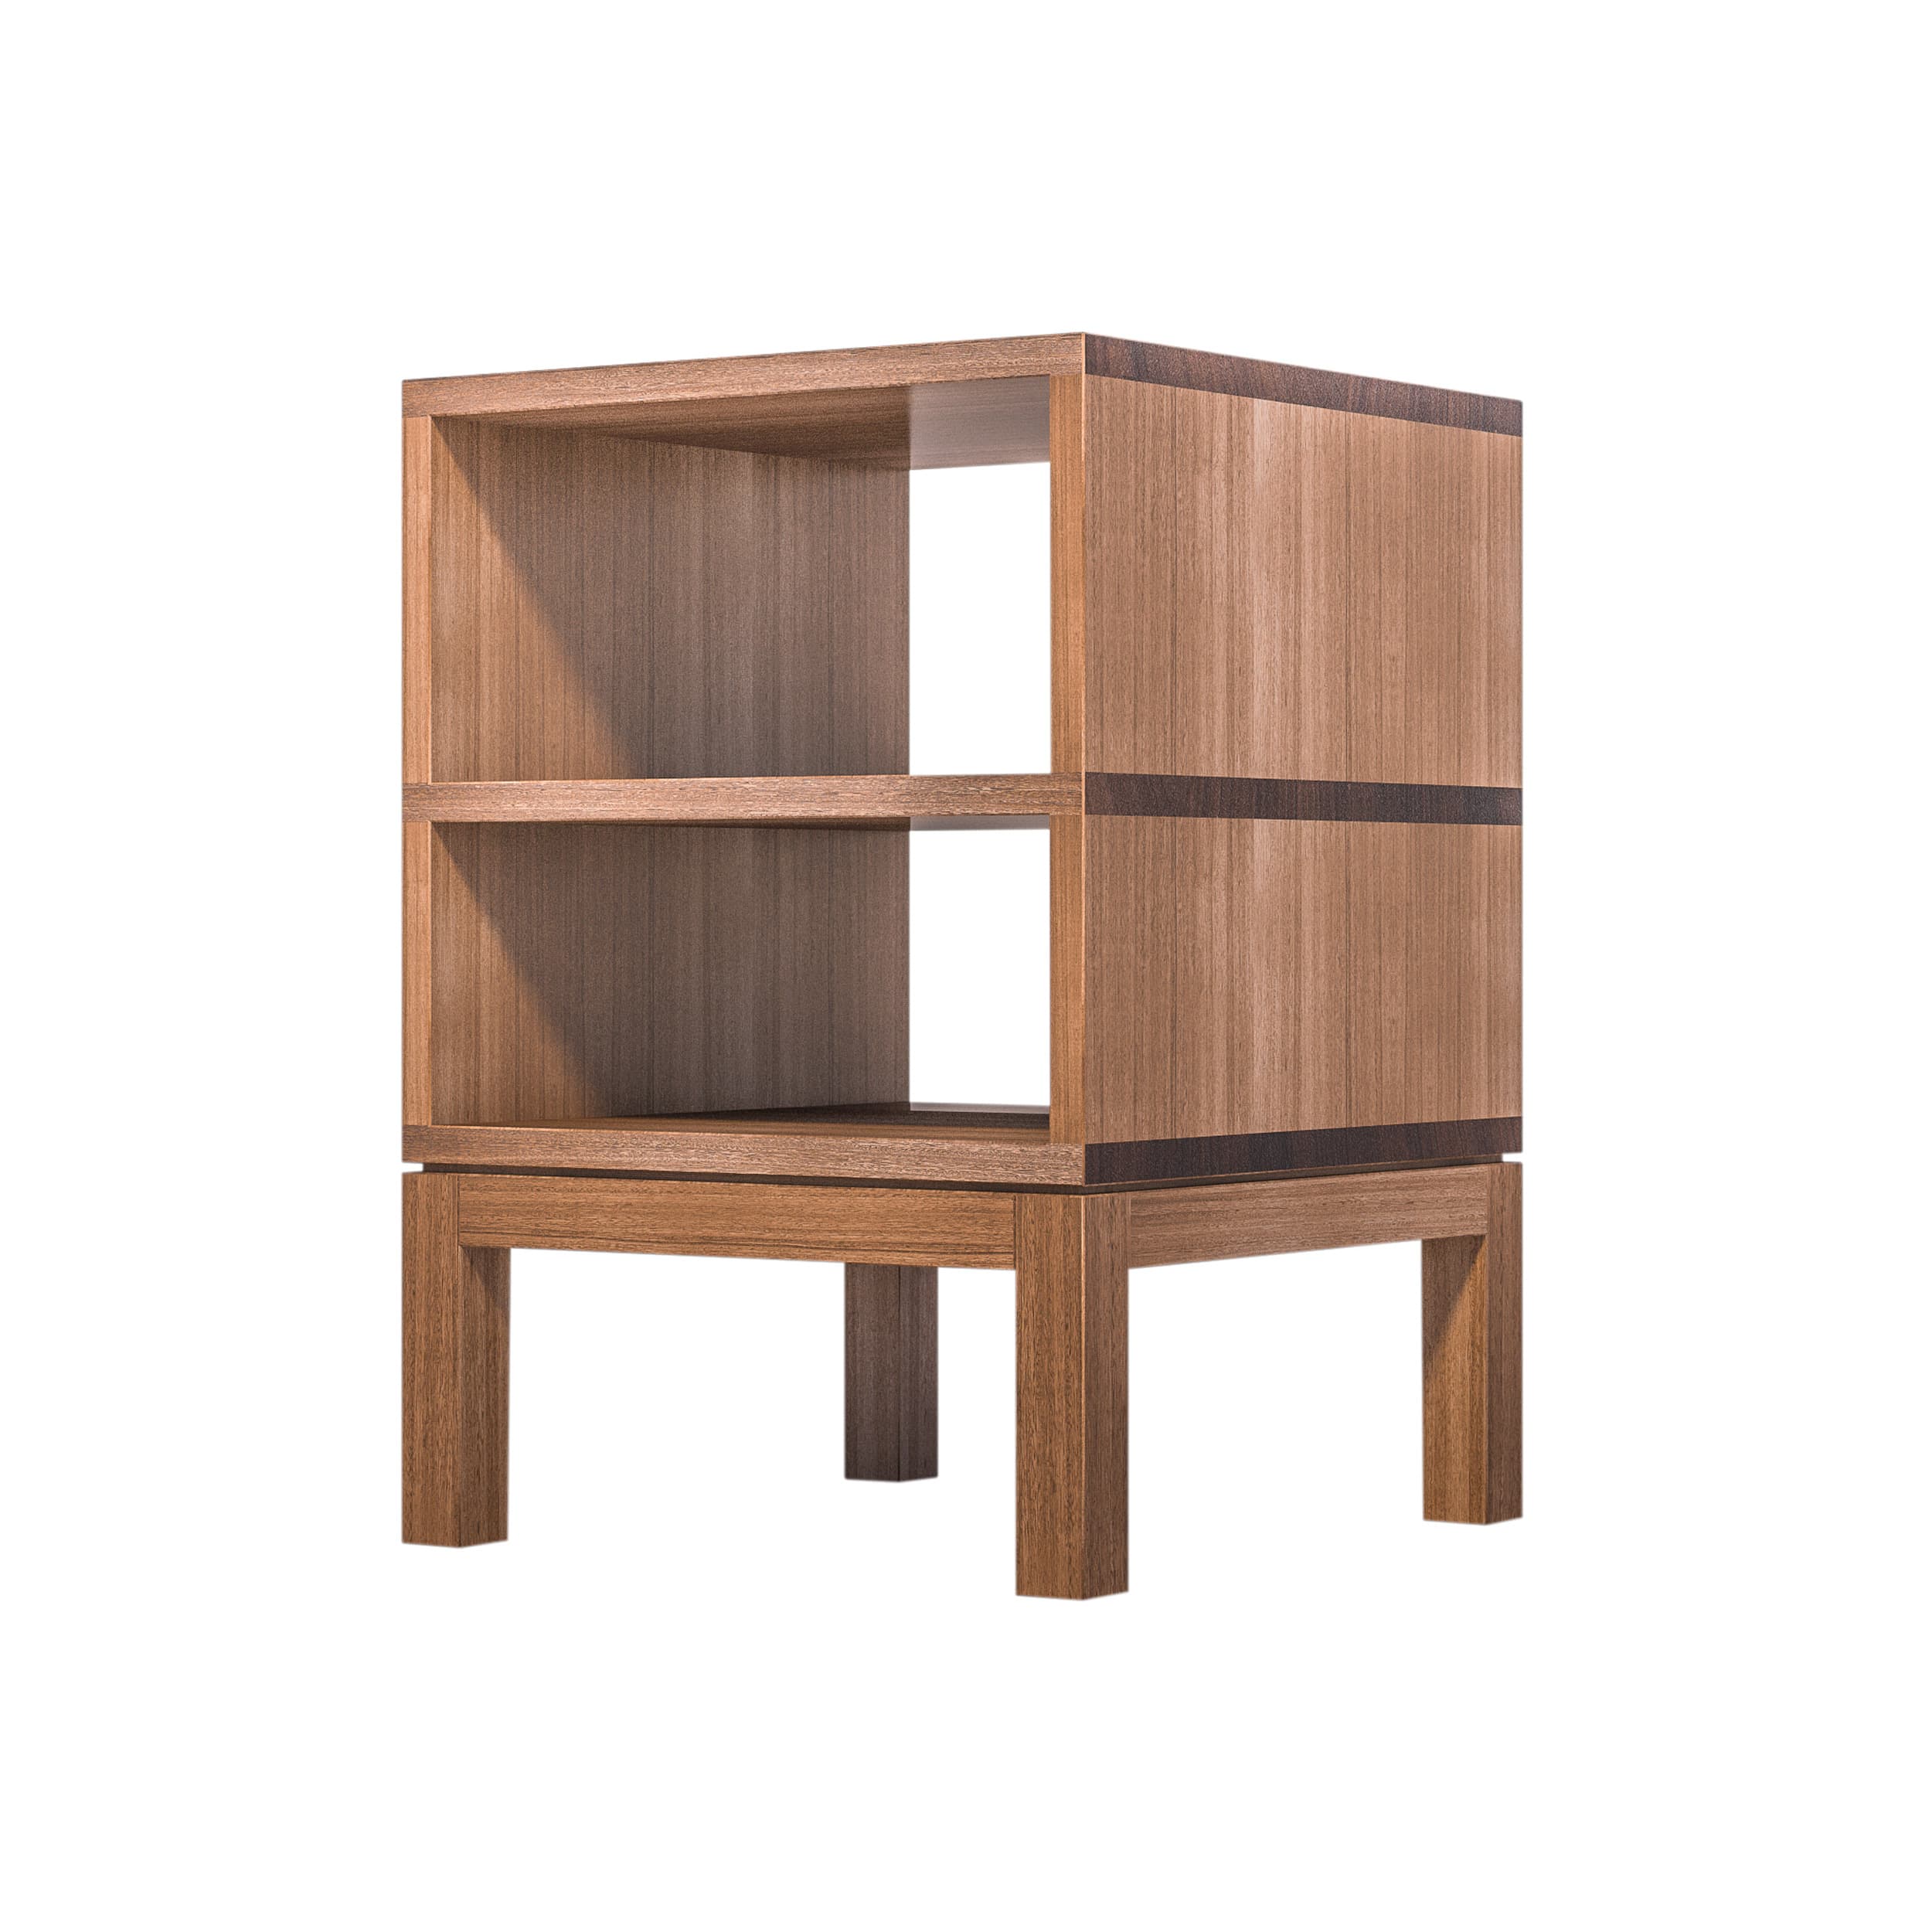 Huey Double Timber Bedside Table